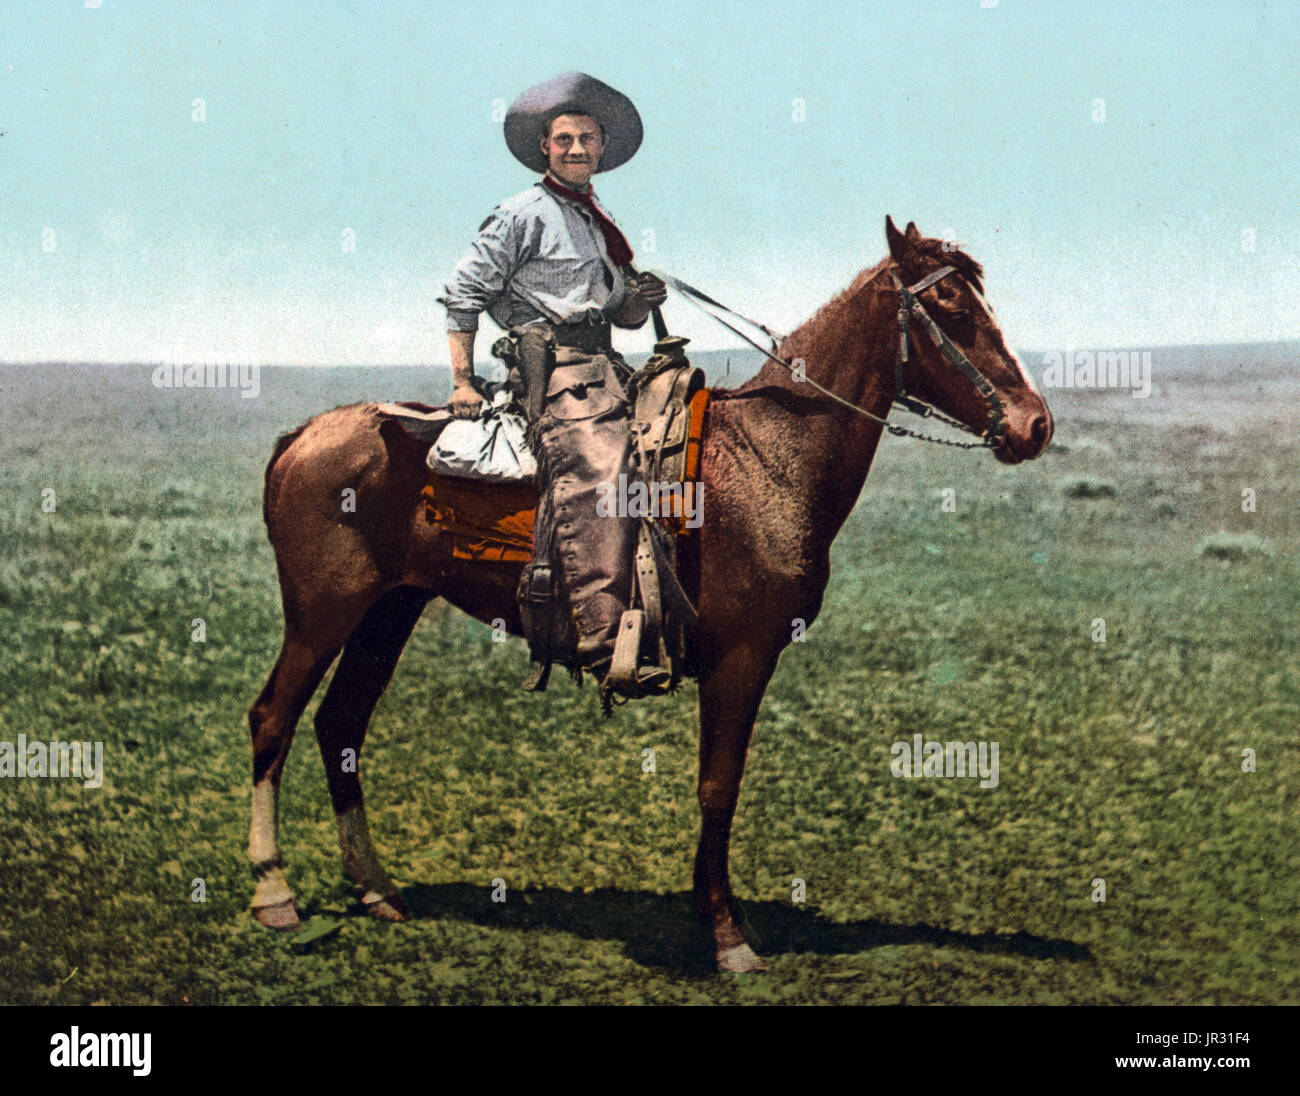 The historic American cowboy of the late 19th century arose from the vaquero traditions of northern Mexico and became a figure of special significance and legend. By the late 1860s, following the American Civil War and the expansion of the cattle industry, former soldiers from both the Union and Confederacy came west, seeking work, as did large numbers of restless white men in general. A significant number of African-American freedmen also were drawn to cowboy life, in part because there was not quite as much discrimination in the west as in other areas of American society at the time. The ave Stock Photo